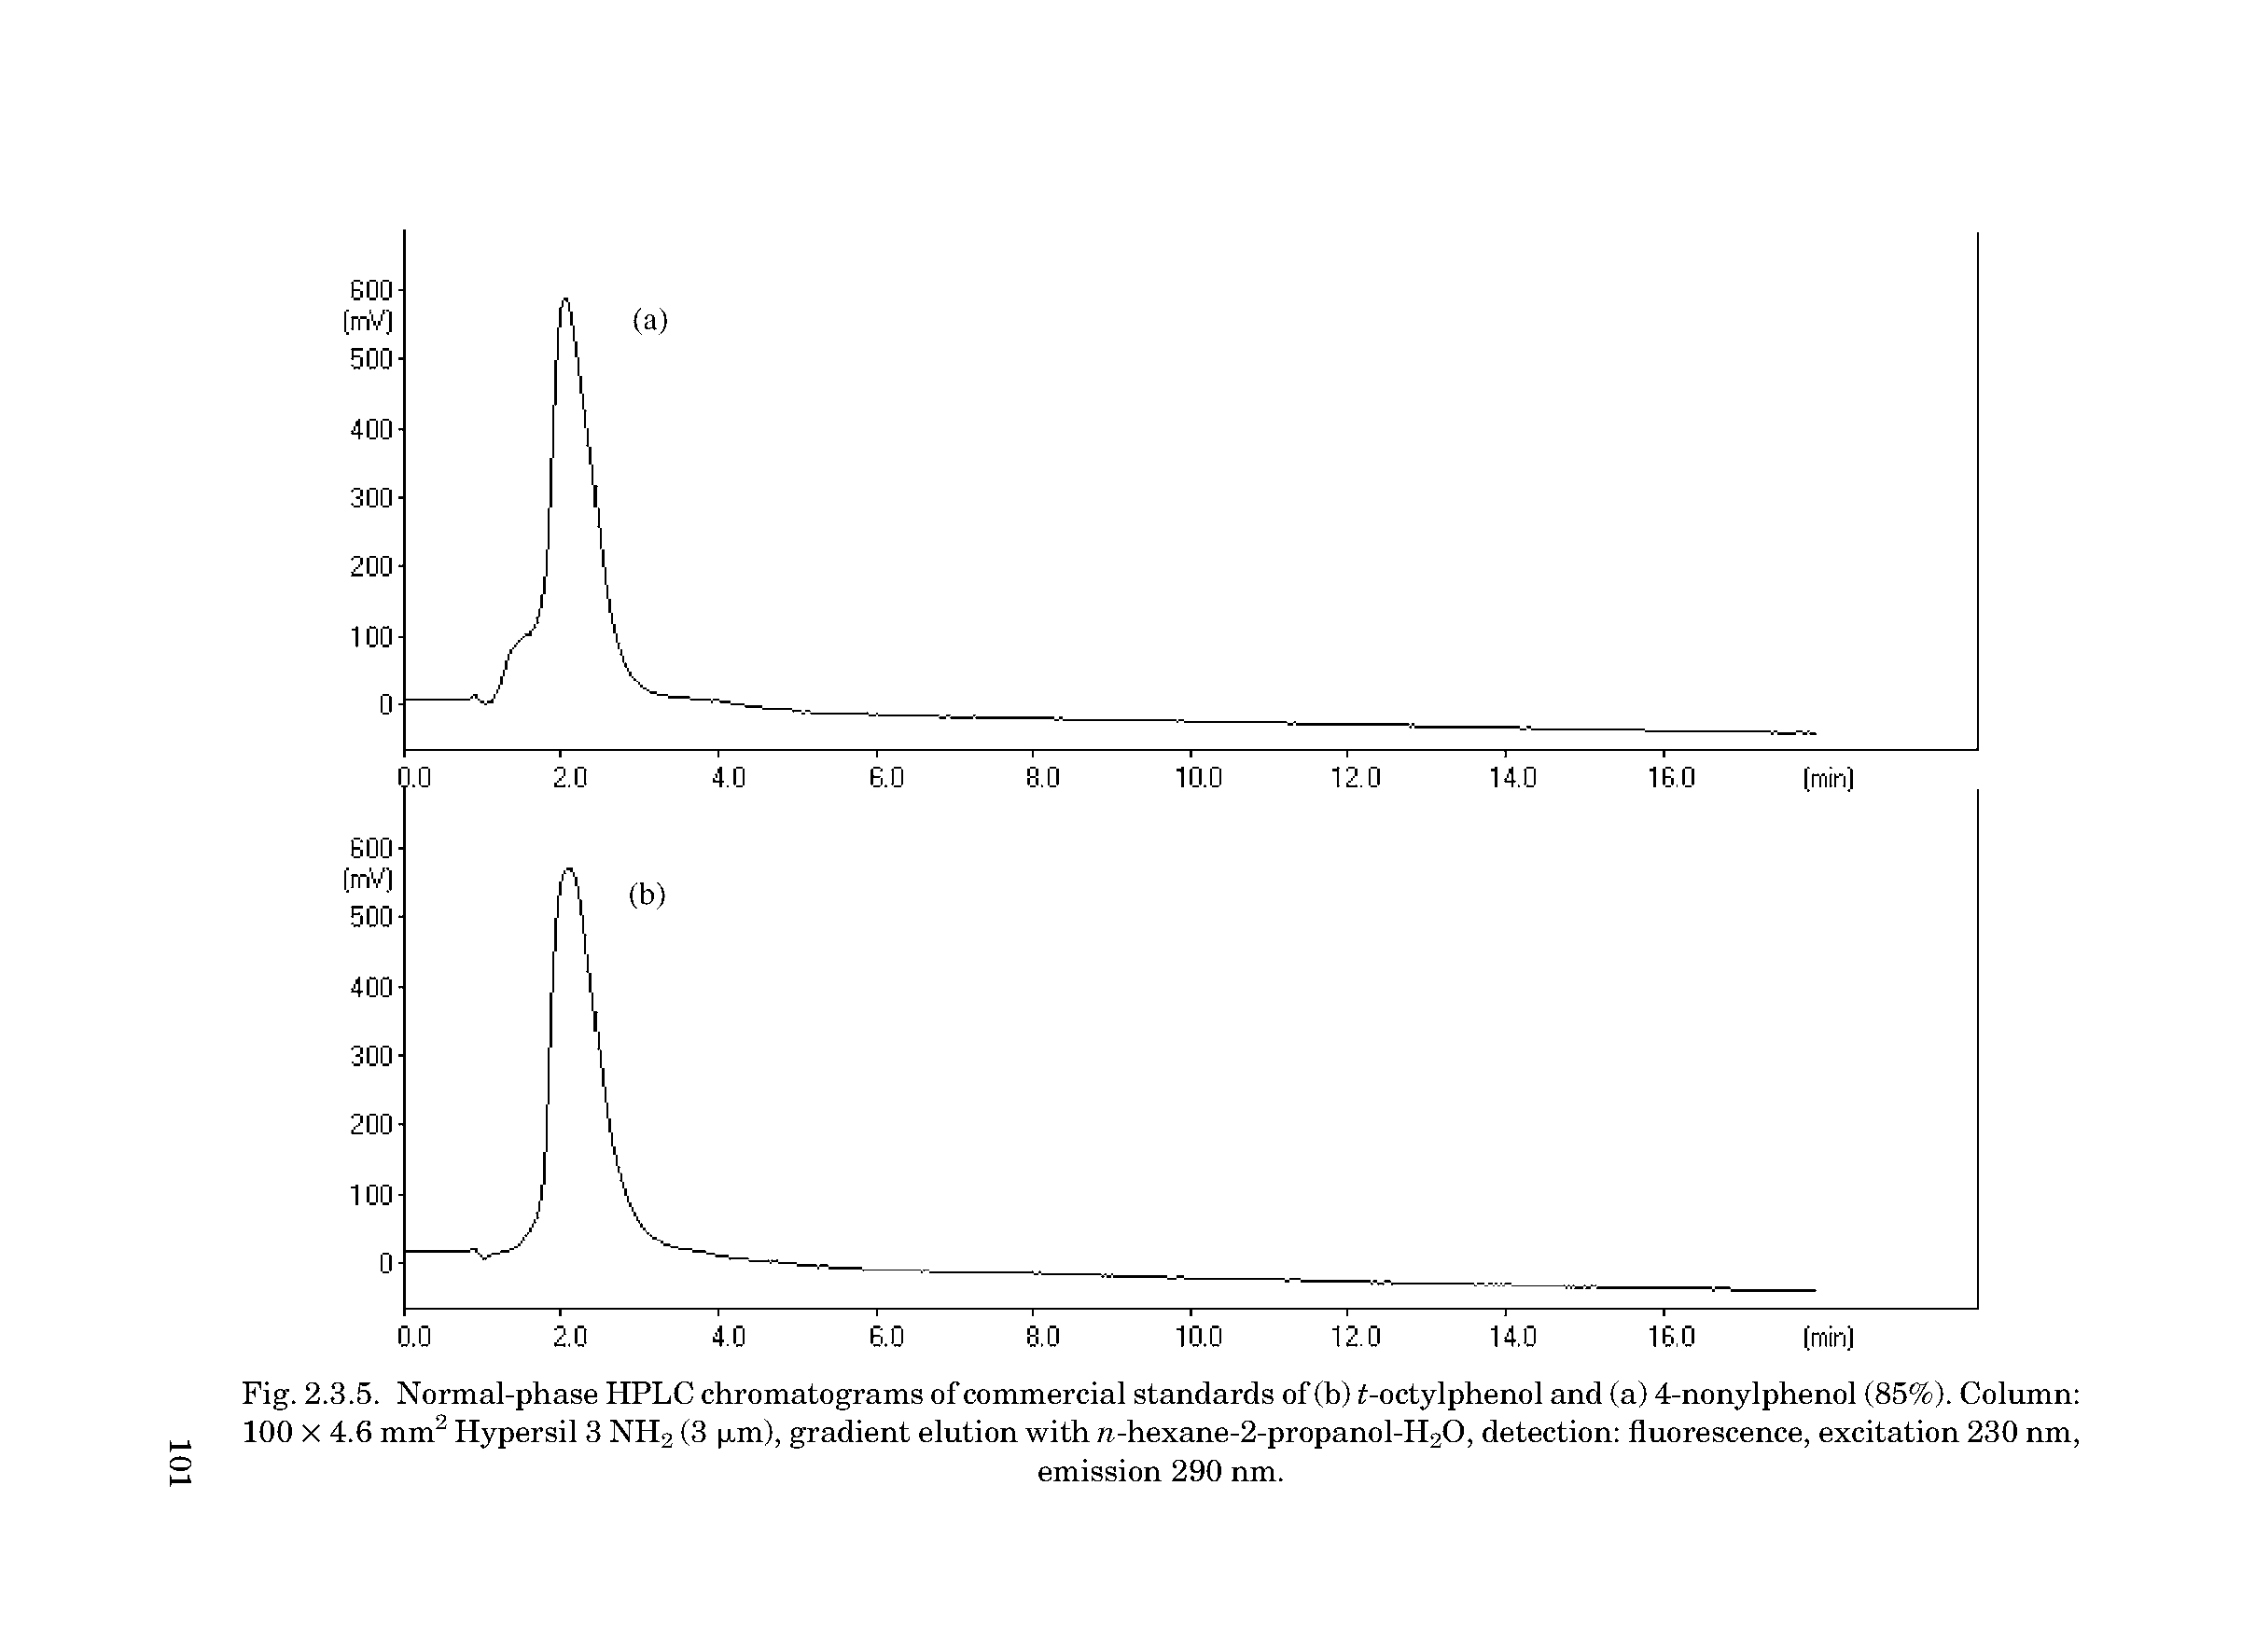 Fig. 2.3.5. Normal-phase HPLC chromatograms of commercial standards of (b) f-octylphenol and (a) 4-nonylphenol (85%). Column 100 X 4.6 mm2 Hypersil 3 NH2 (3 pm), gradient elution with re-hexane-2-propanol-H20, detection fluorescence, excitation 230 nm...